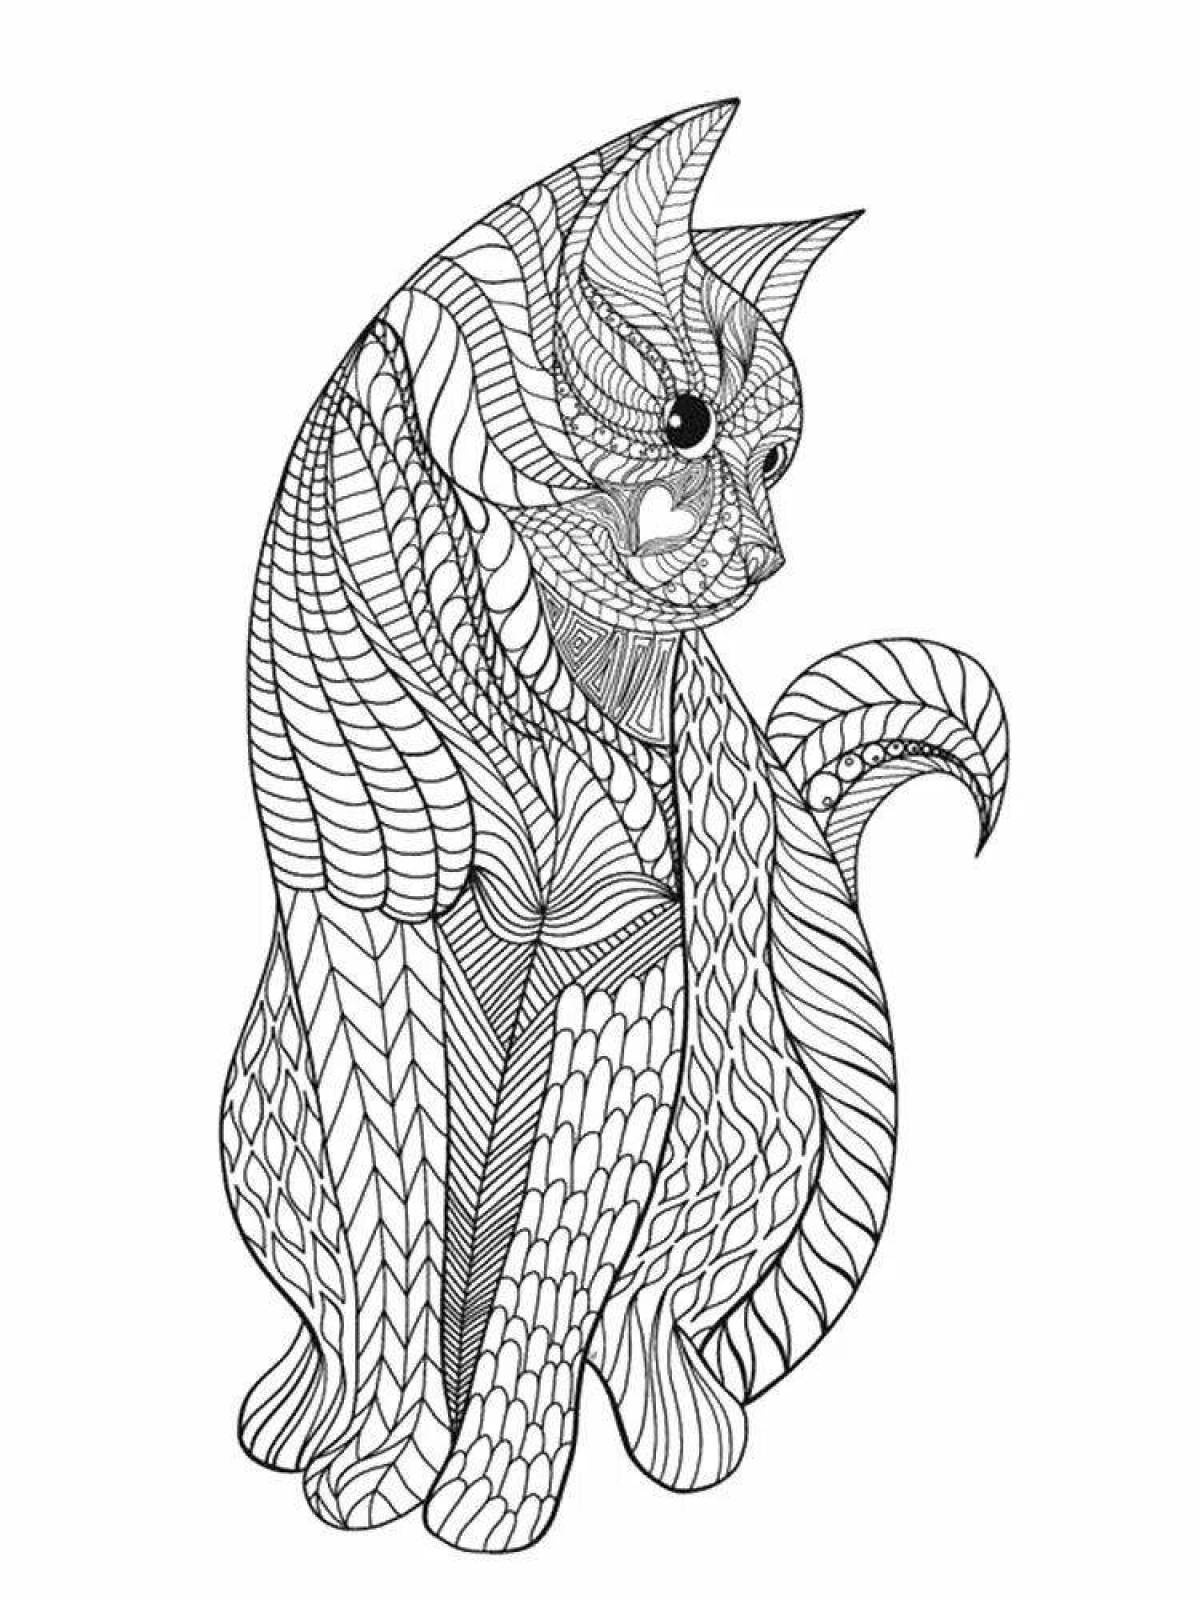 Coloring page nice spiral cat